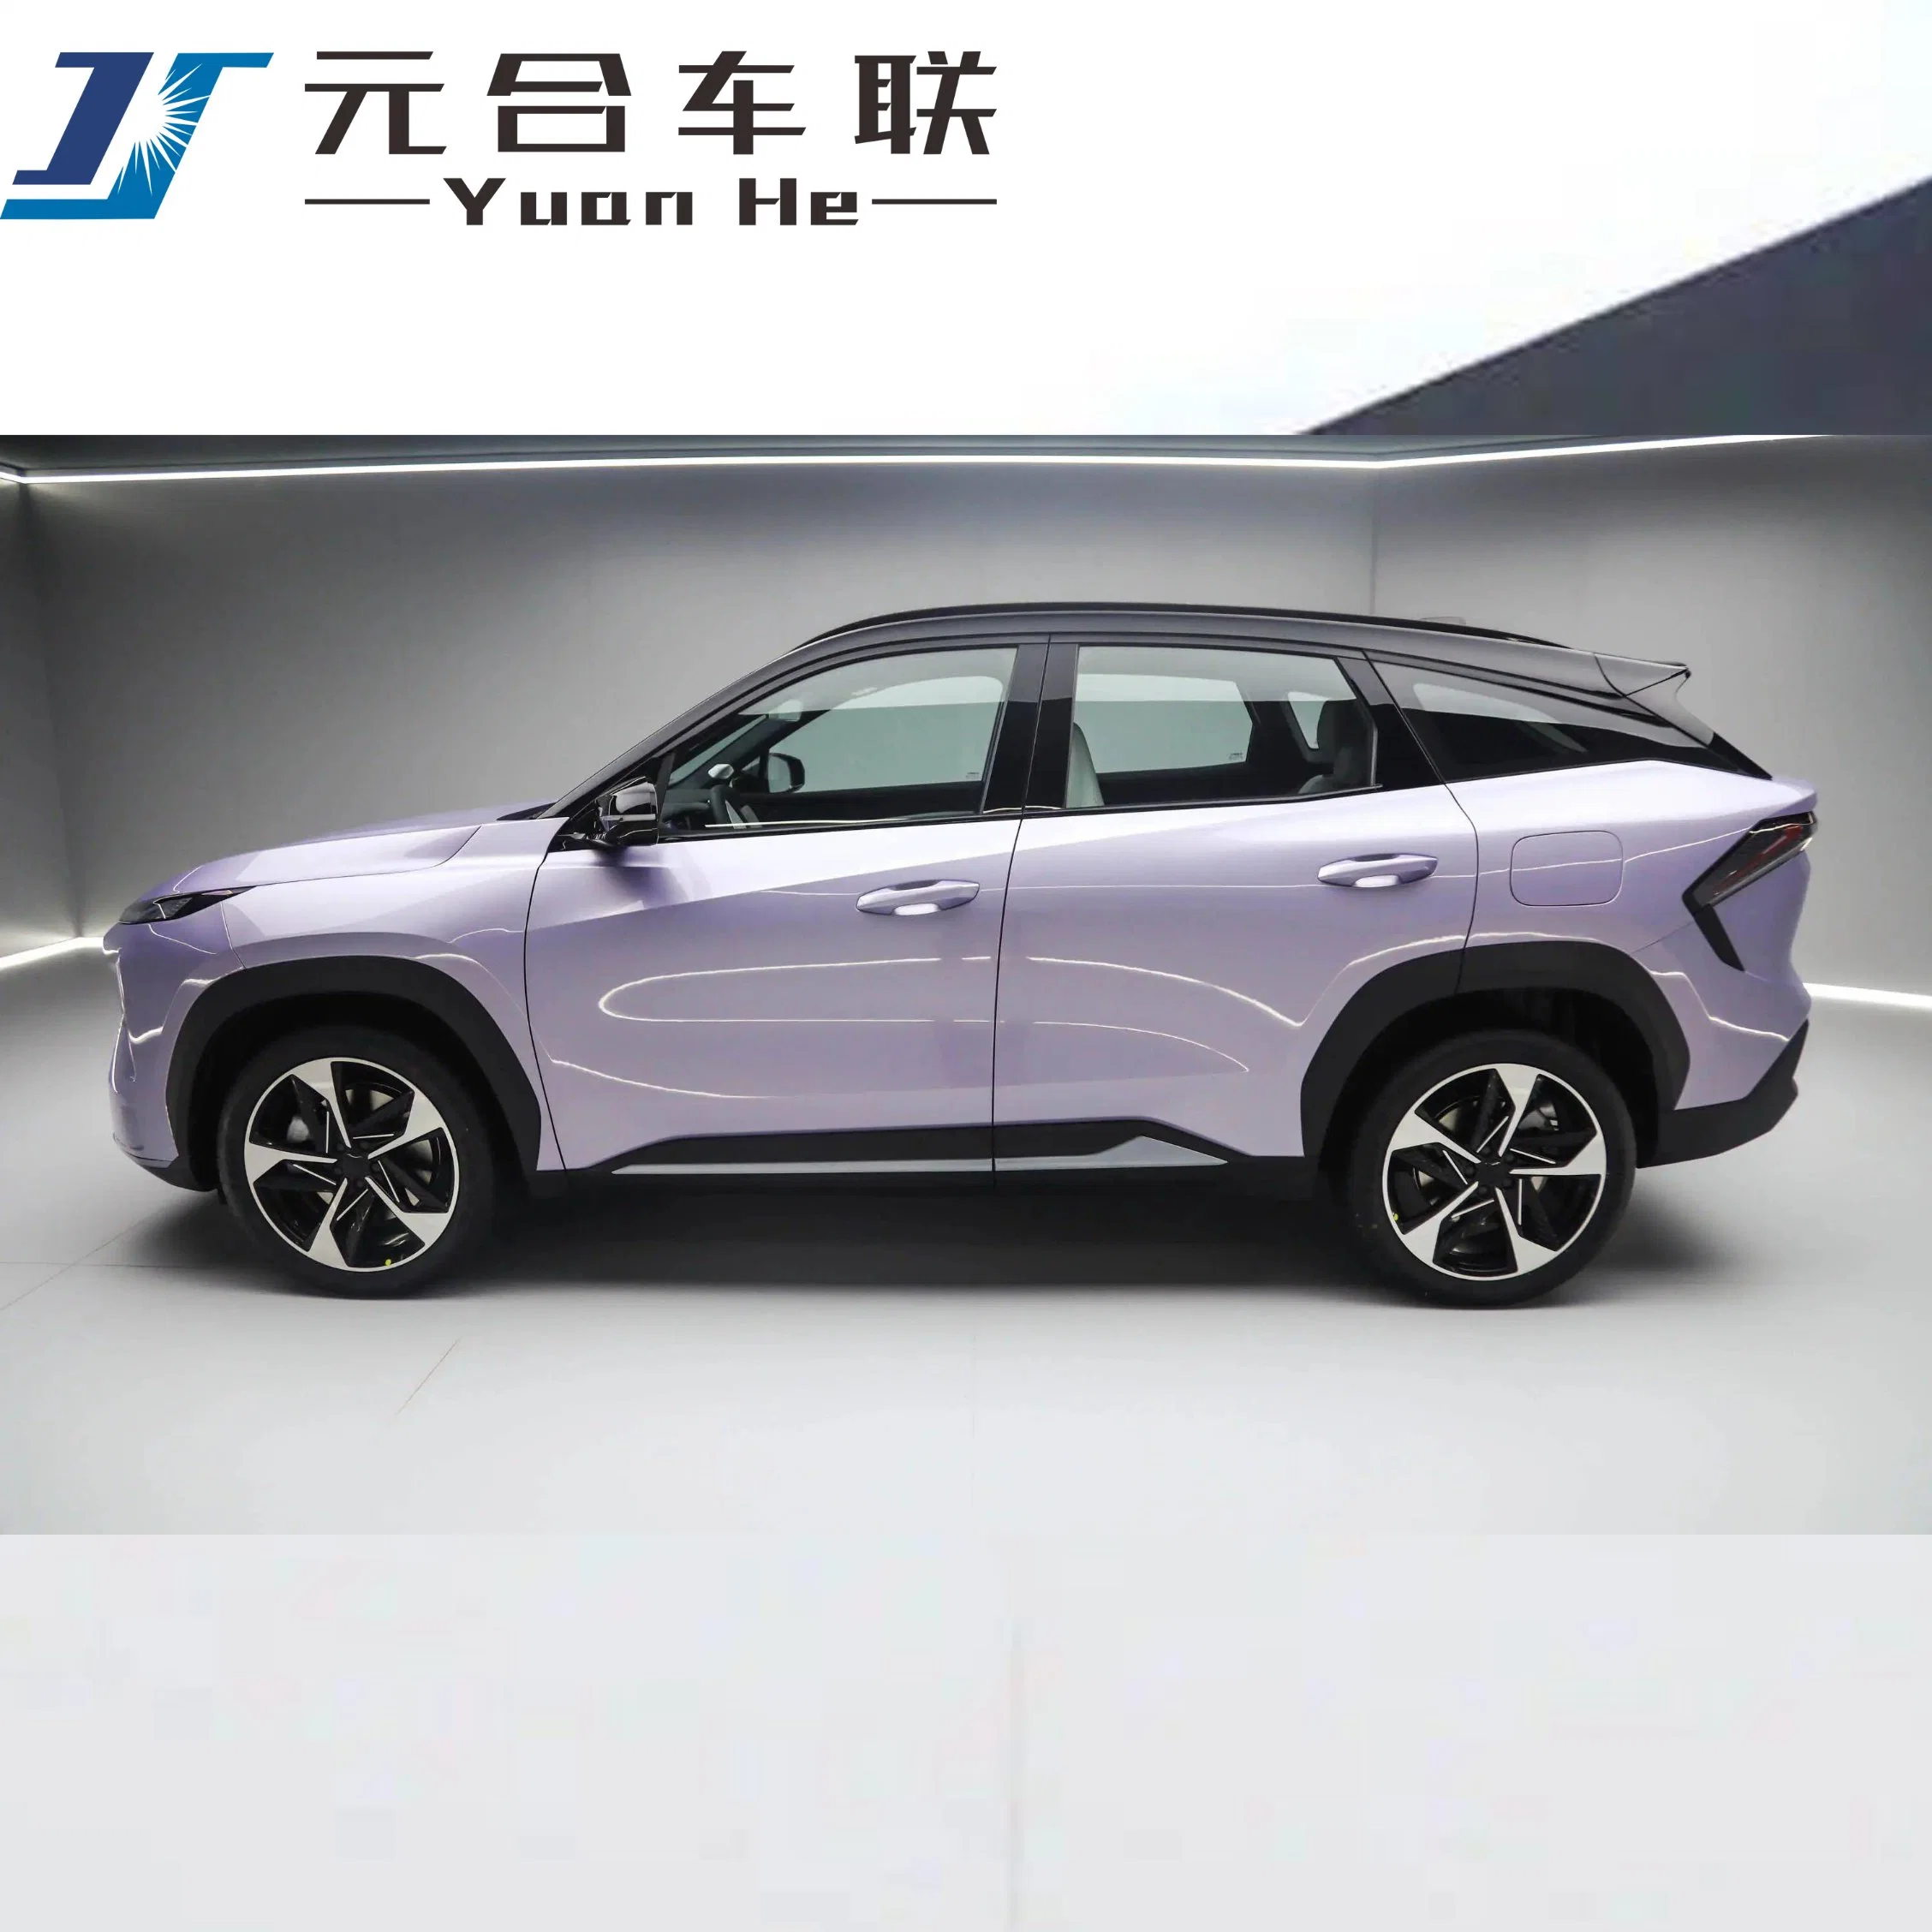 Cars High Speed Electric Vehicle Used Car New Geely Galaxy L7us$